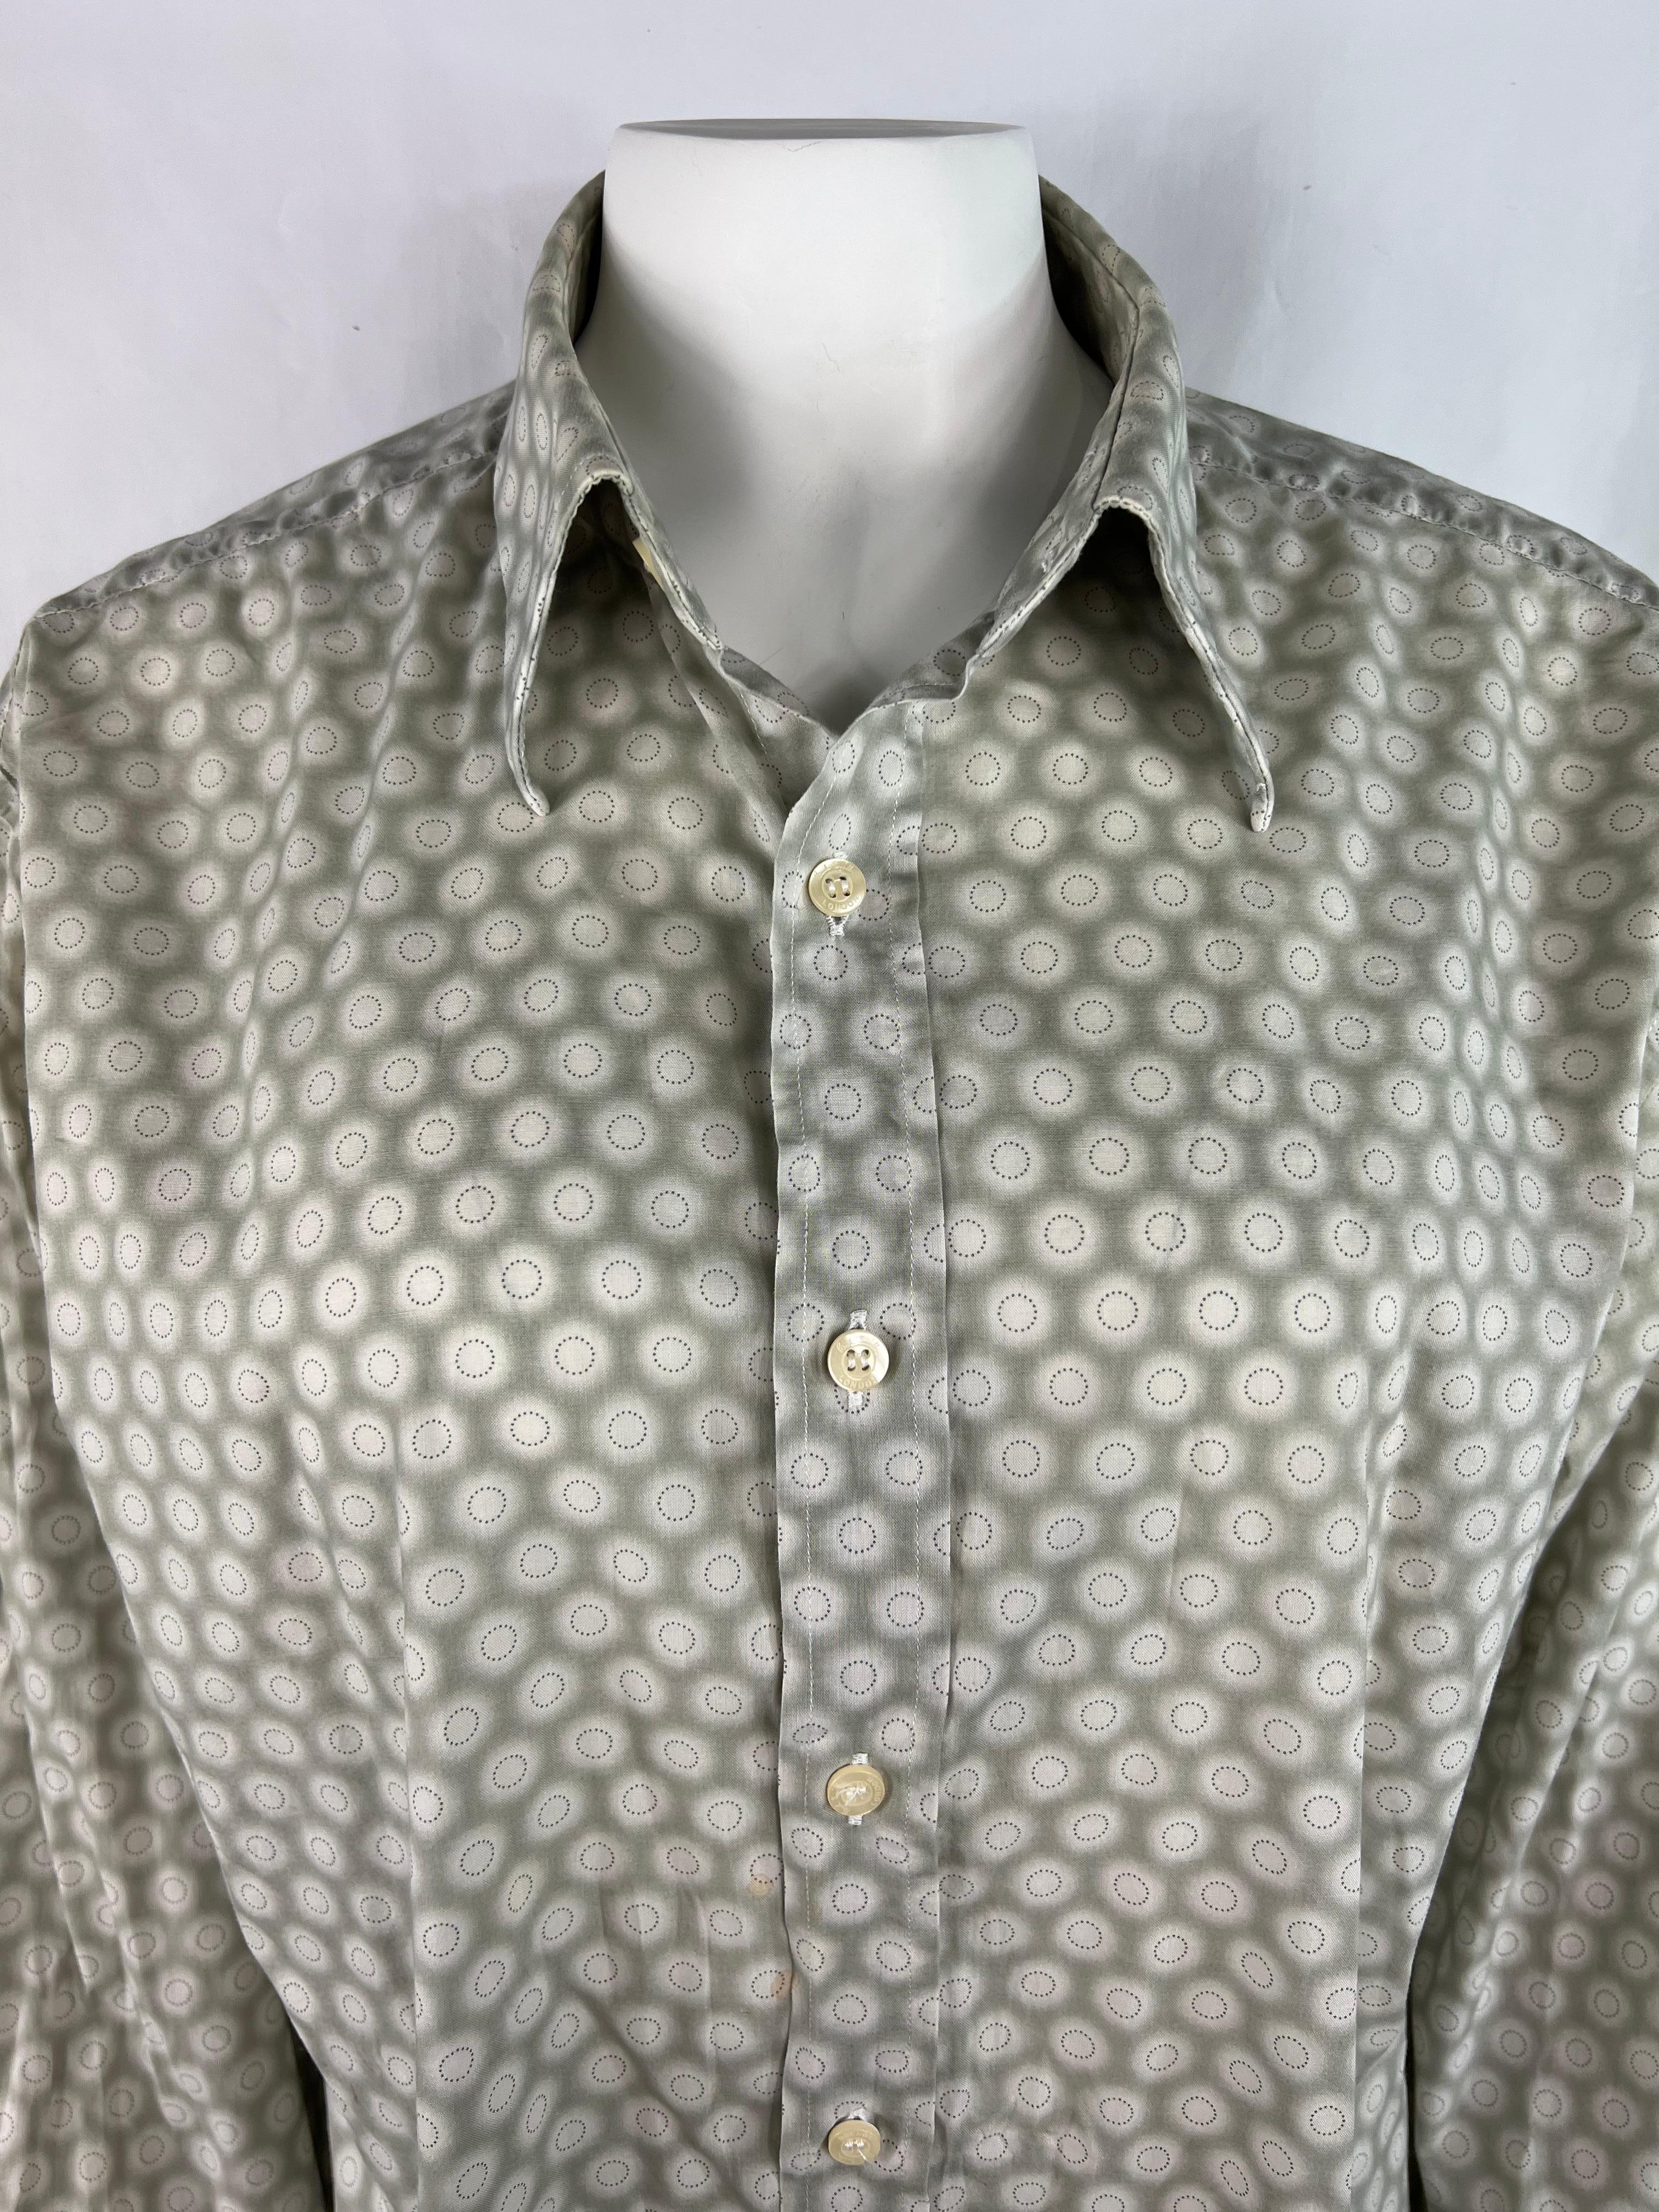 Product details:

The shirt features front button down closure and geometric print. Made in Italy.